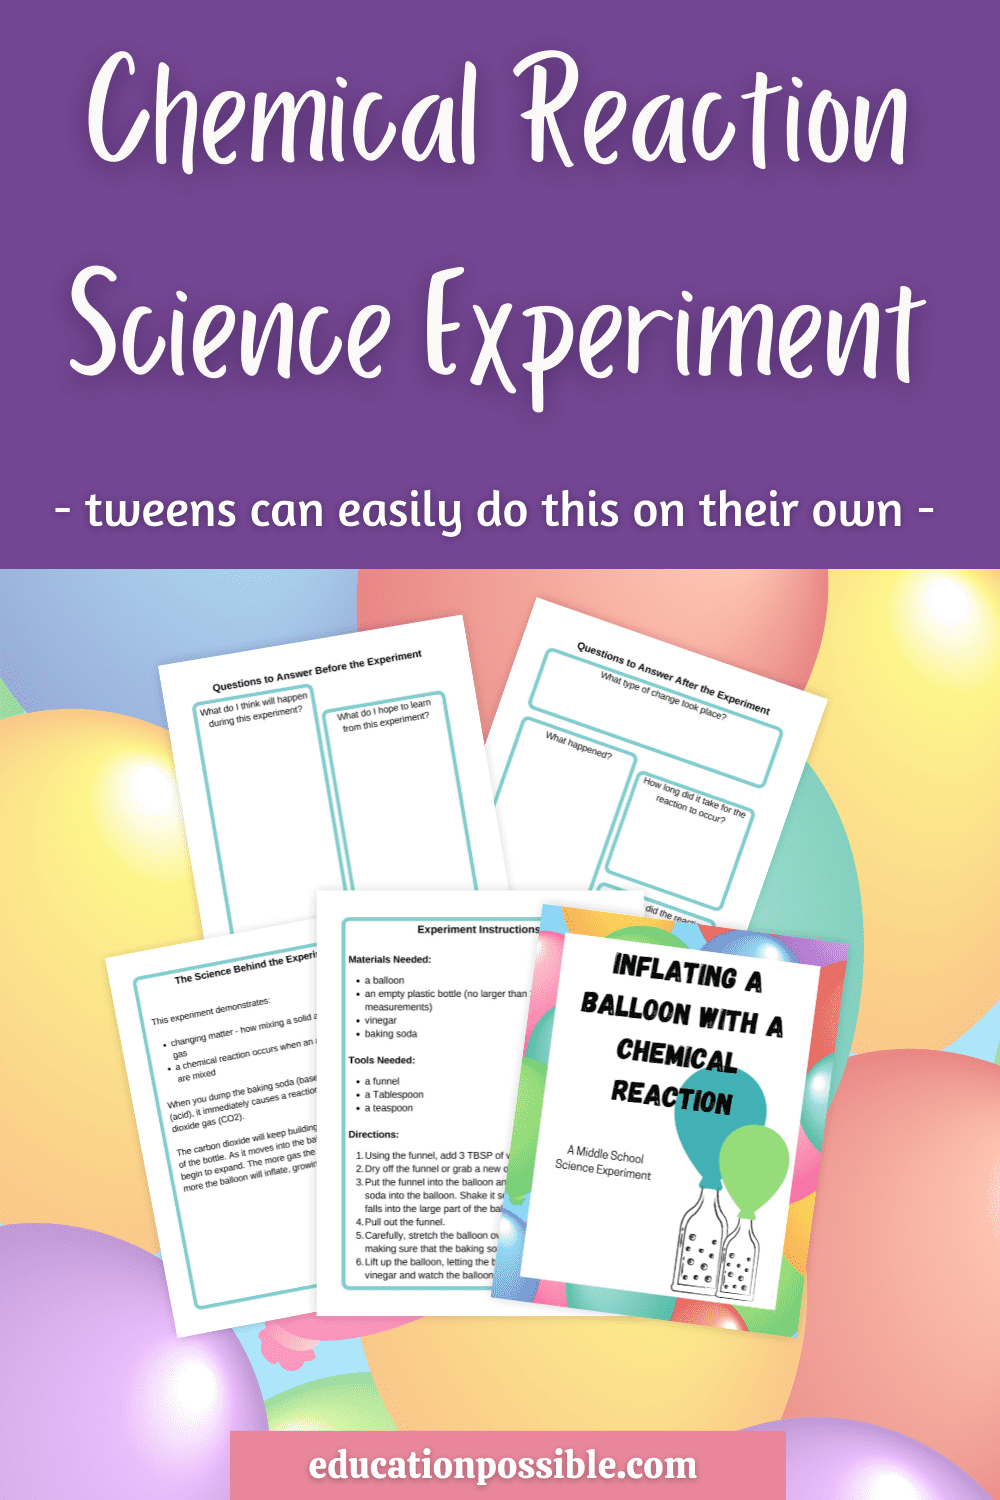 Image for a 5 page printable for an experiment inflating a balloon with baking soda and vinegar.